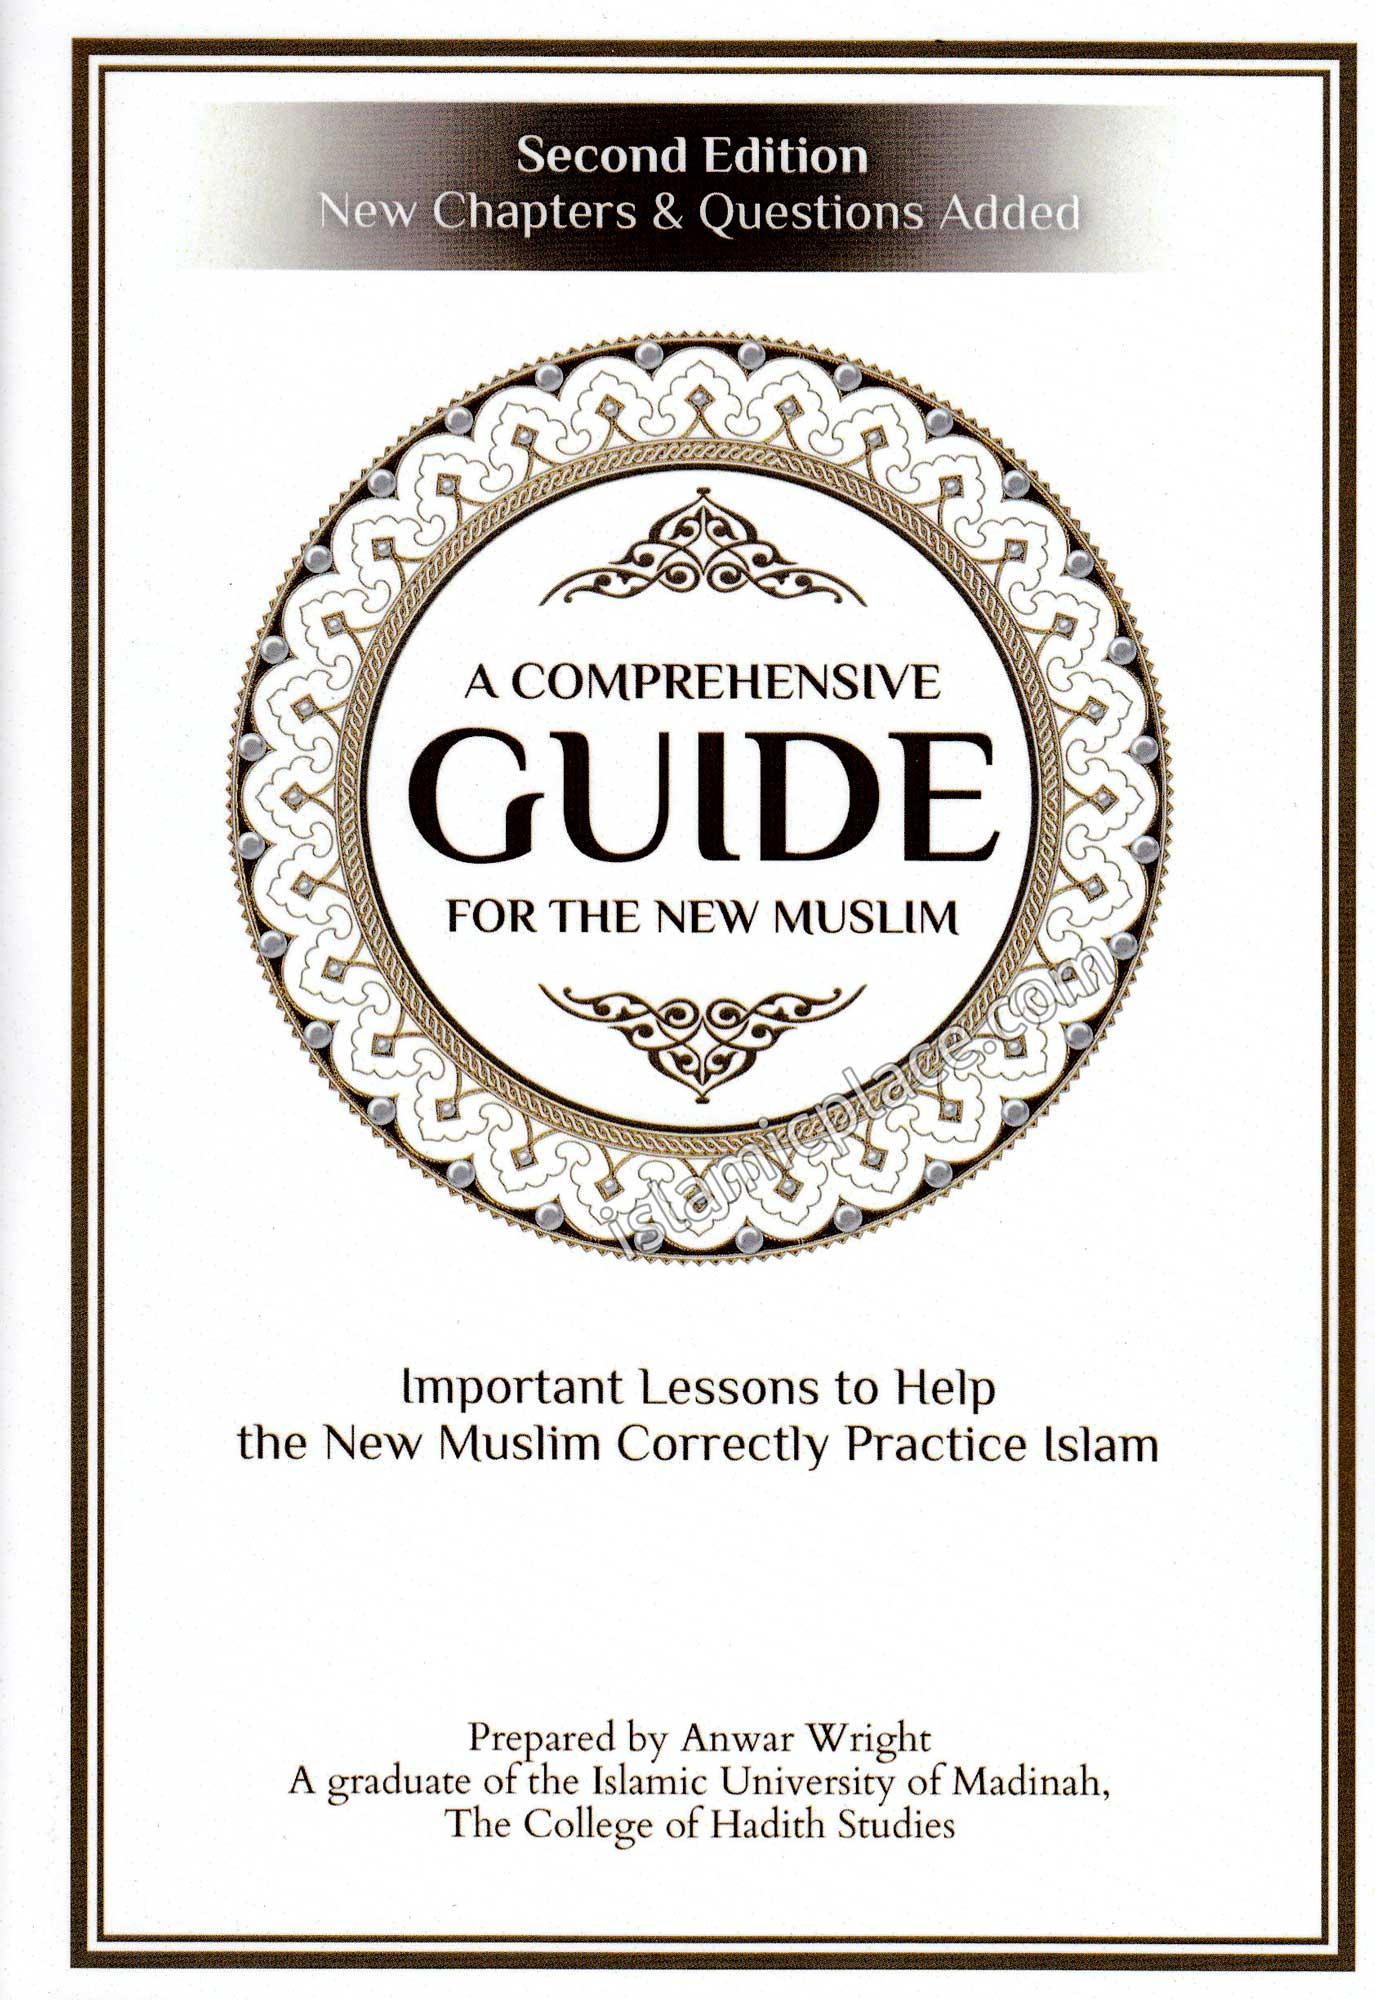 A Comprehensive Guide For the New Muslim - Important Lessons to Help the New Muslim Correctly Practice Islam